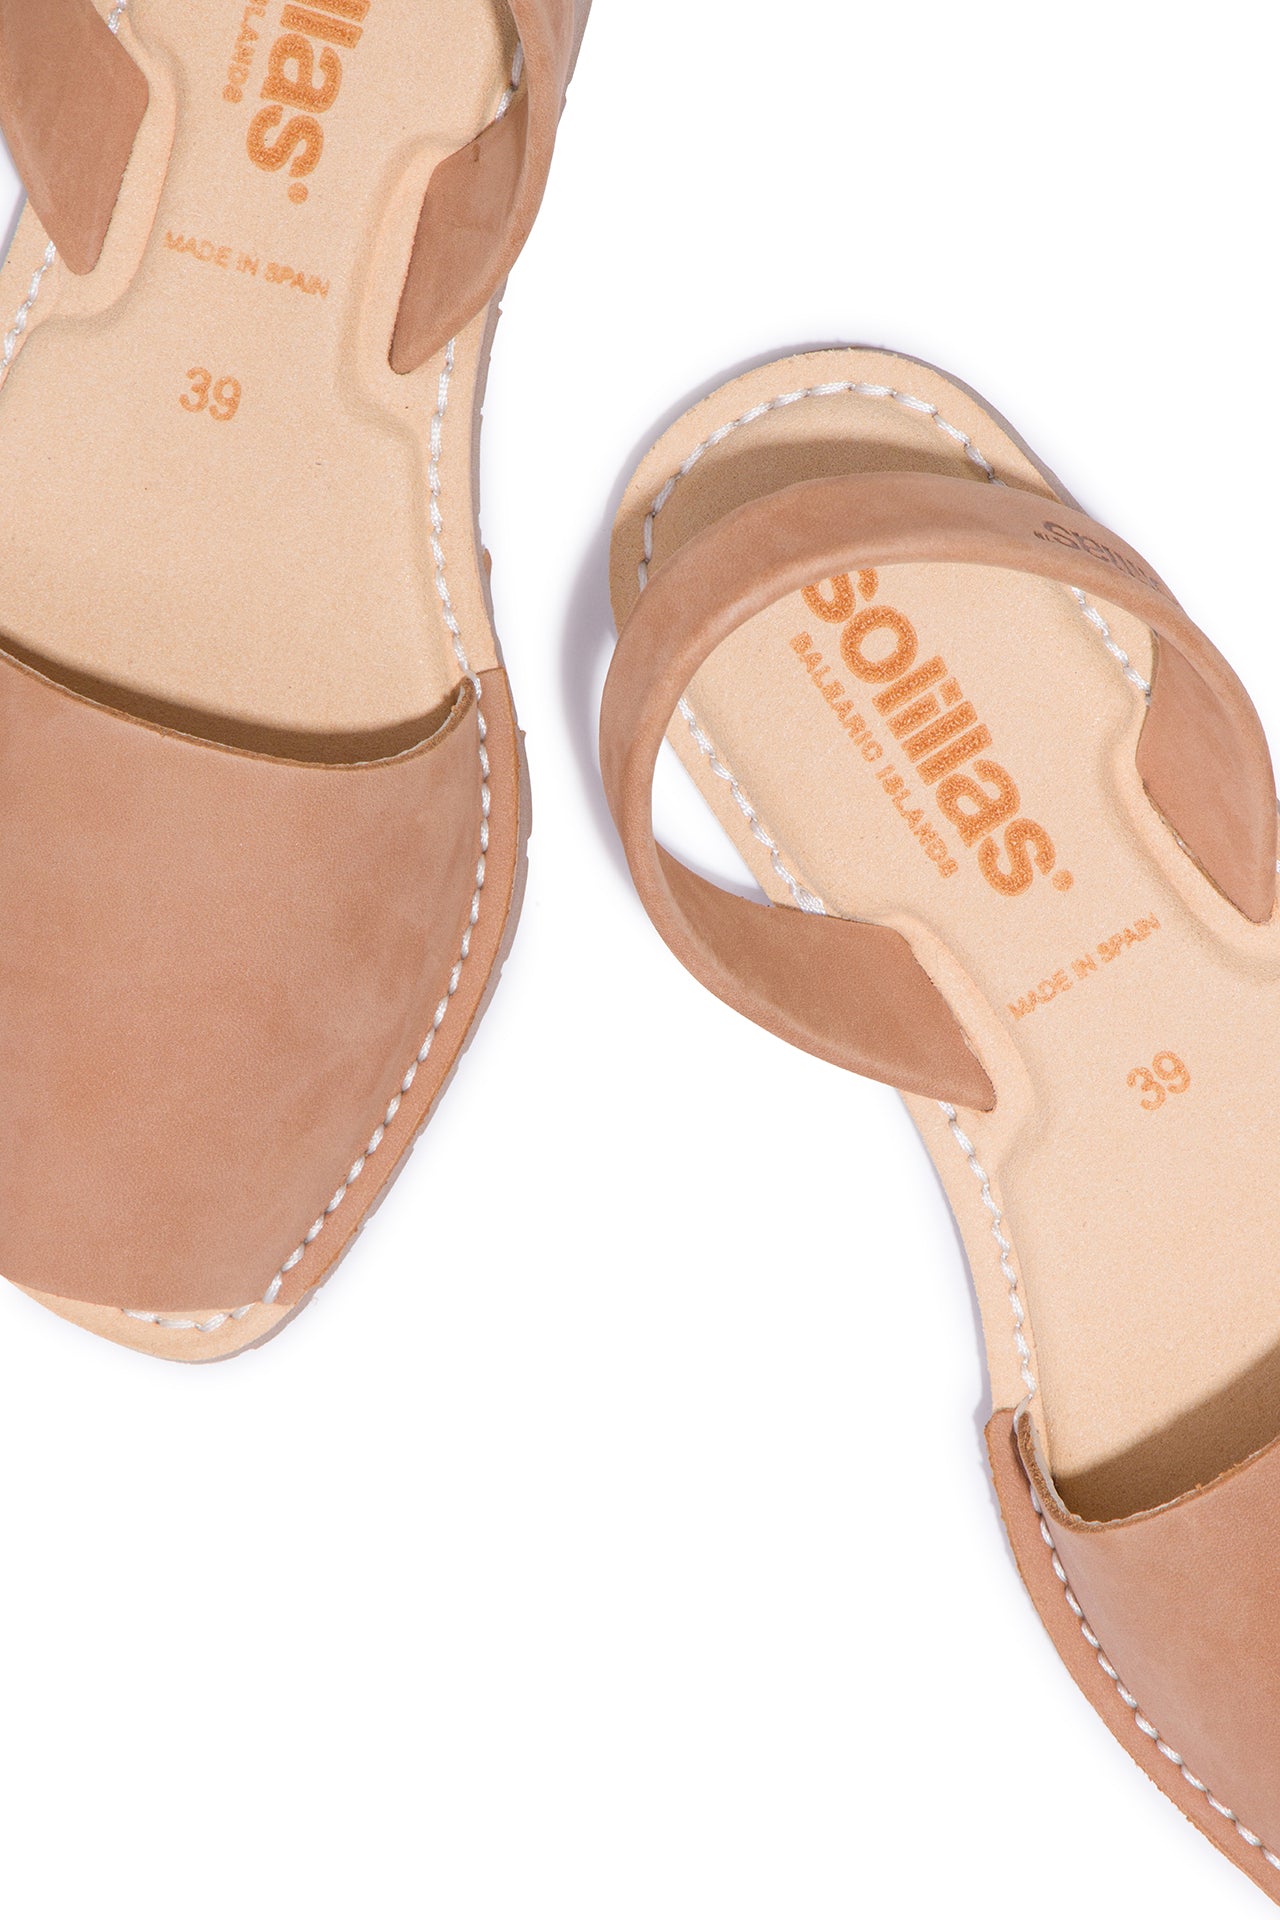 Cuero Mimoso - Original Menorcan Sandals in Tan Nubuck Leather with Padded Insole